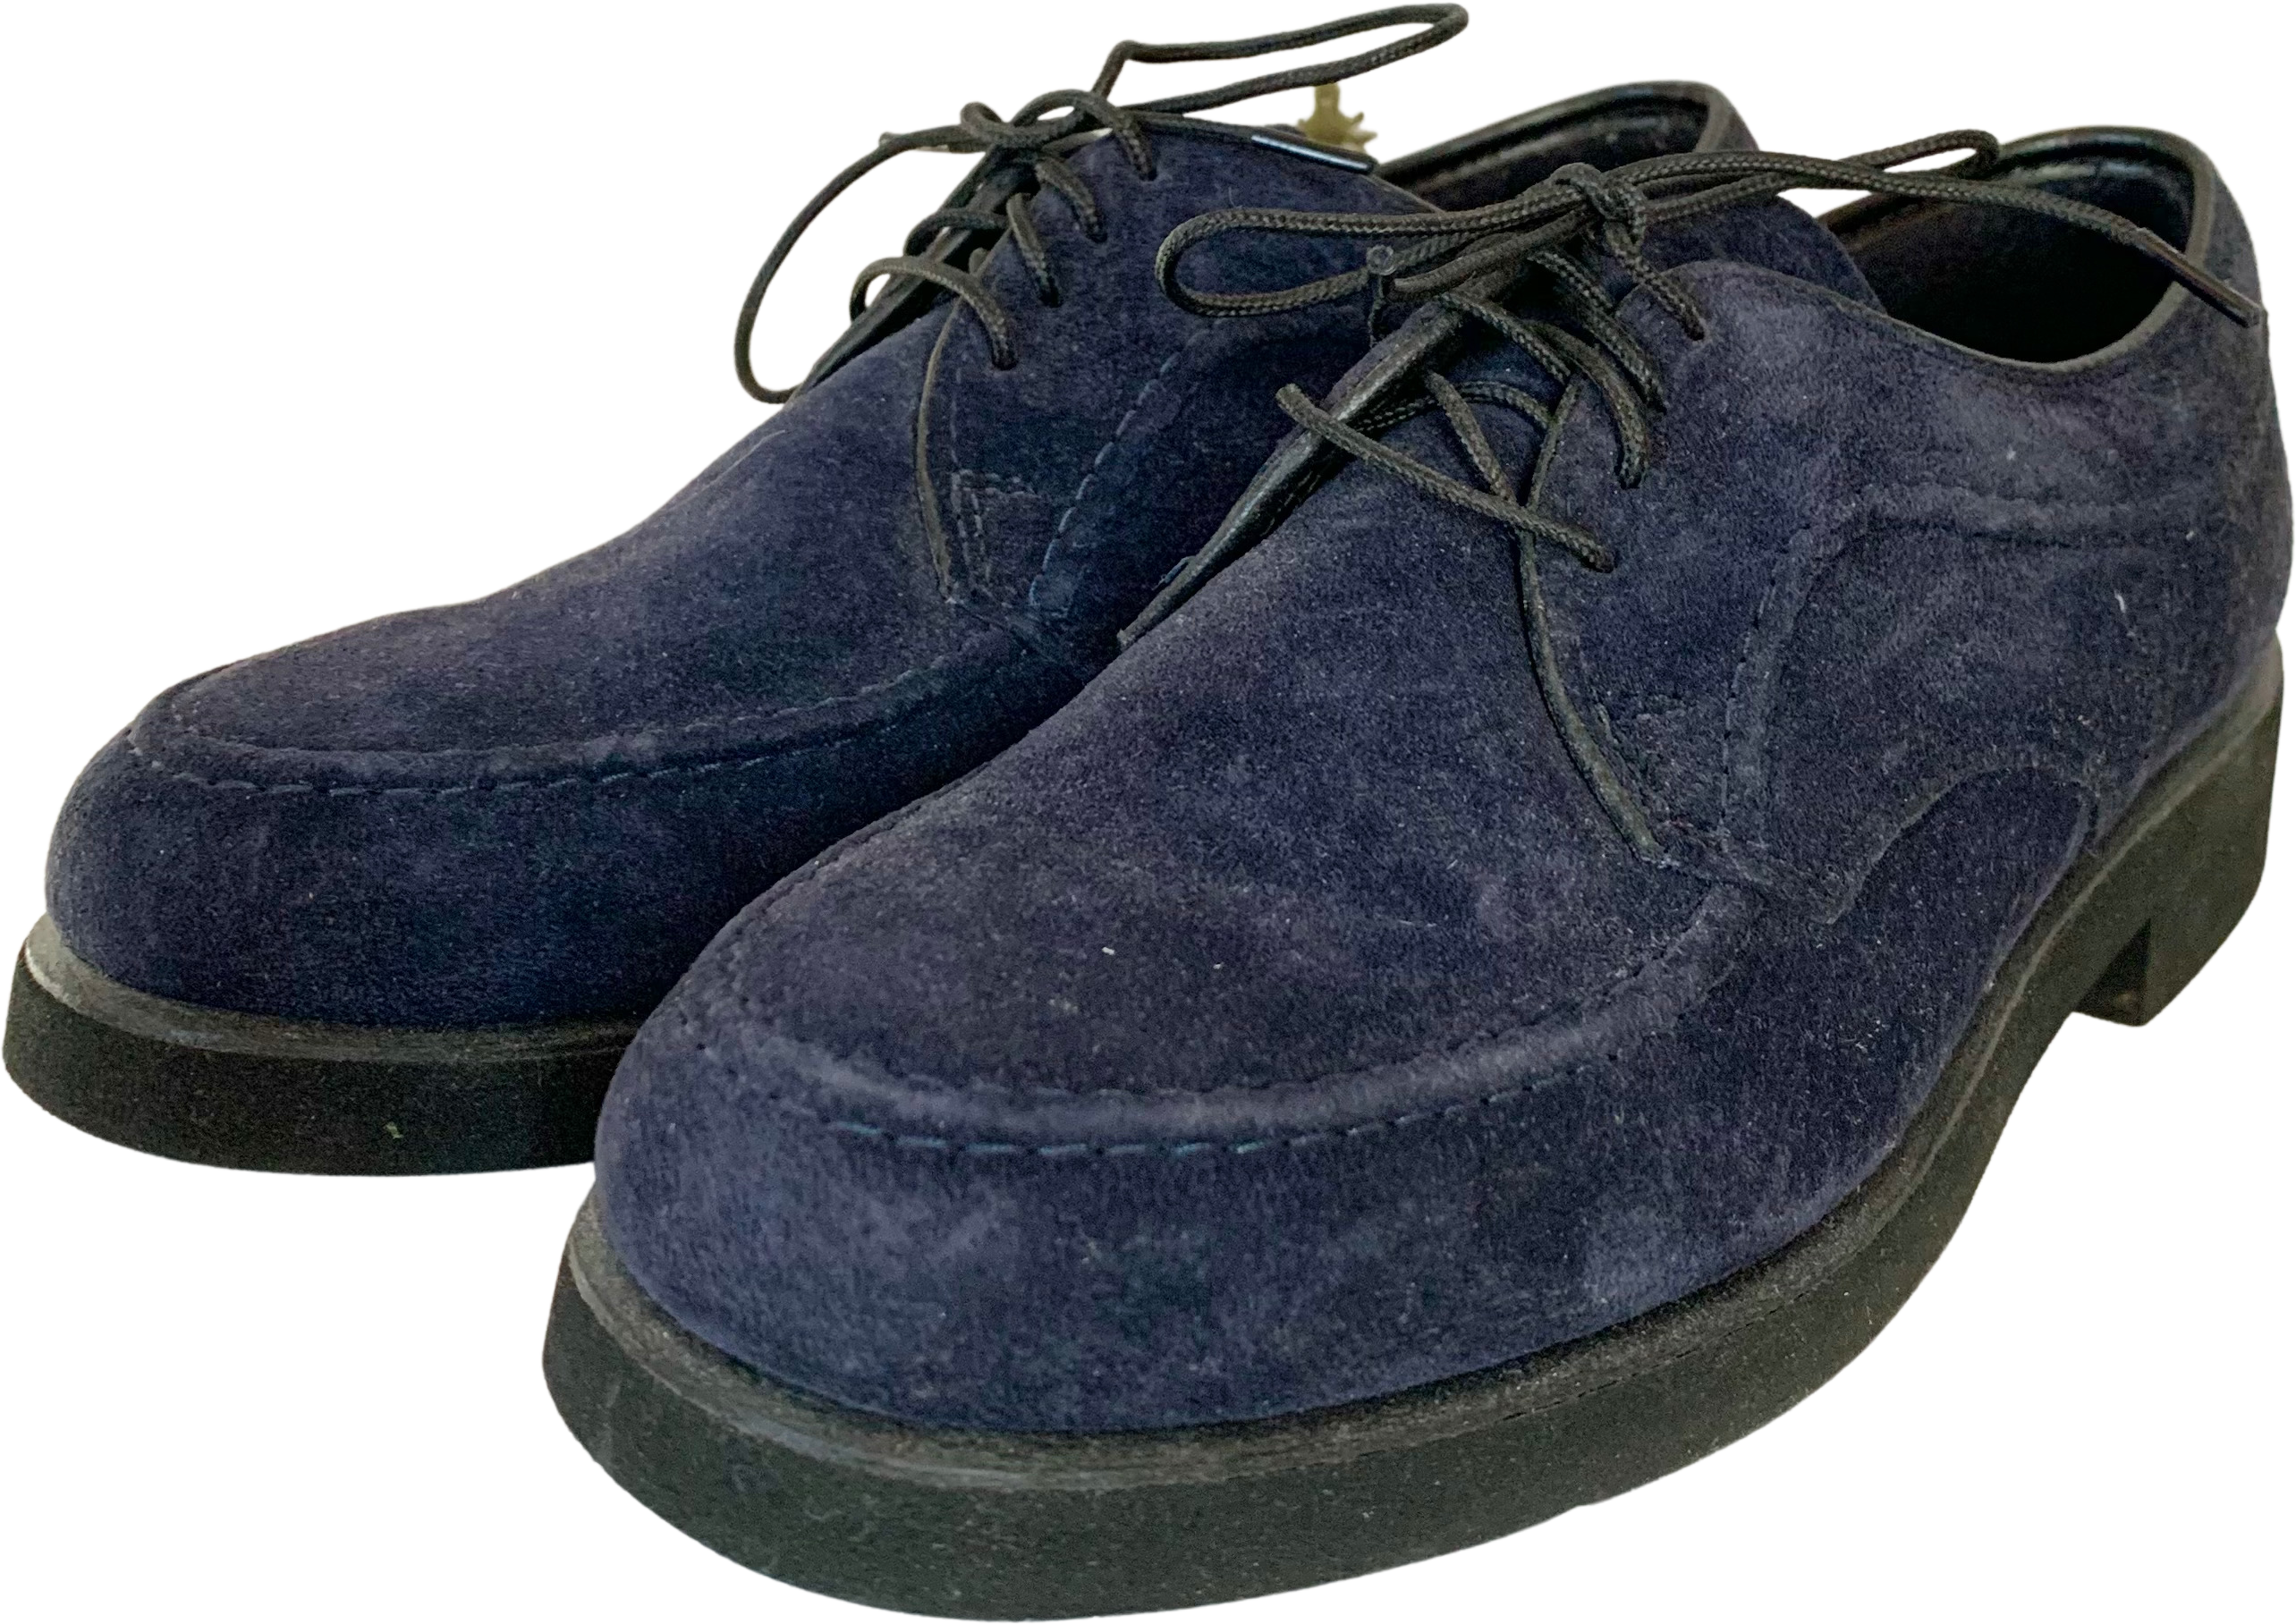 Vintage Size 6 1/2 Navy Suede Hush Puppies by Hush Puppies | Shop THRILLING